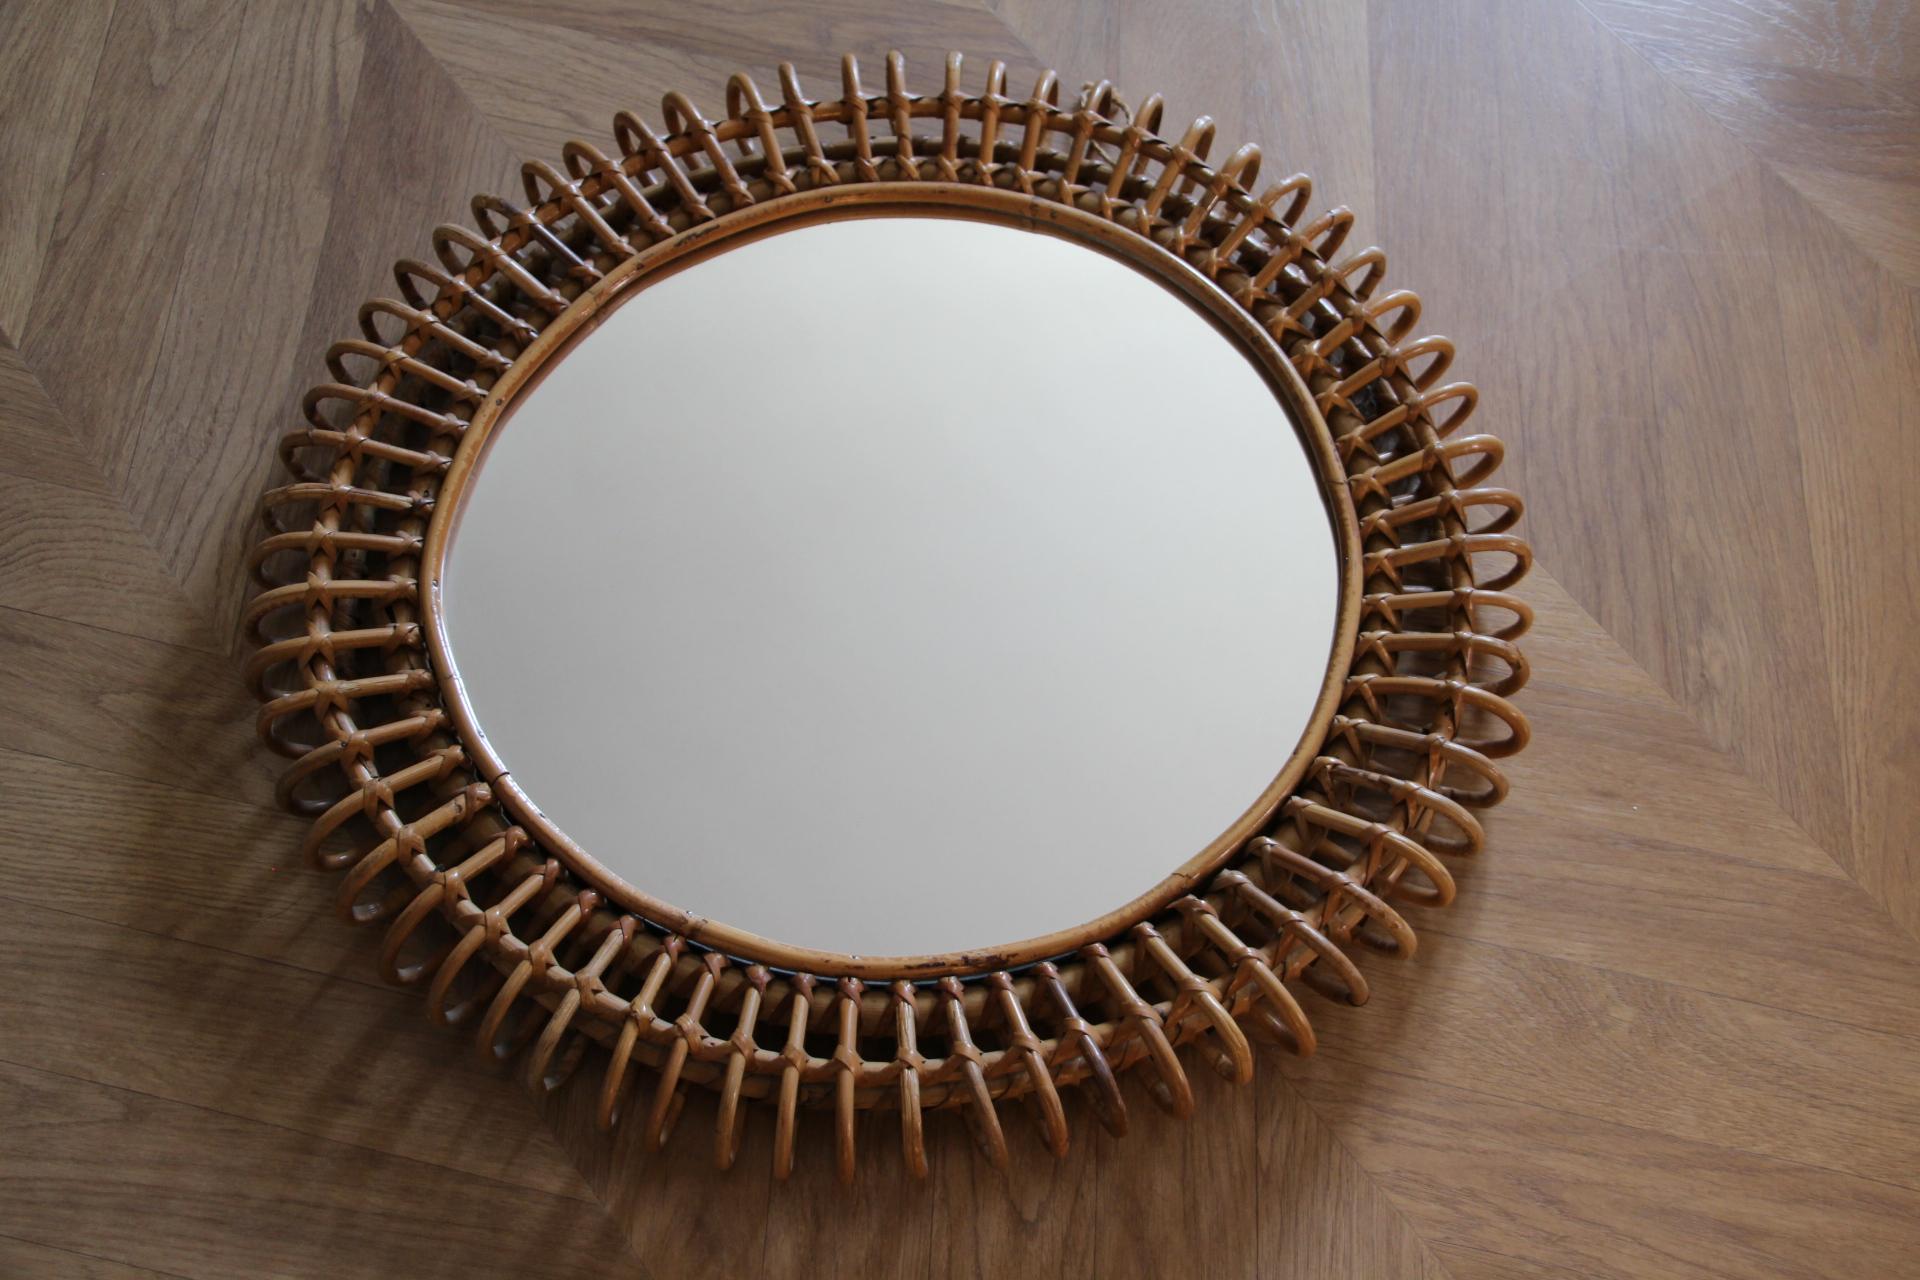 Vintage 1960s Rattan and Bamboo Round Wall Mirror by Franco Albini For Sale 7